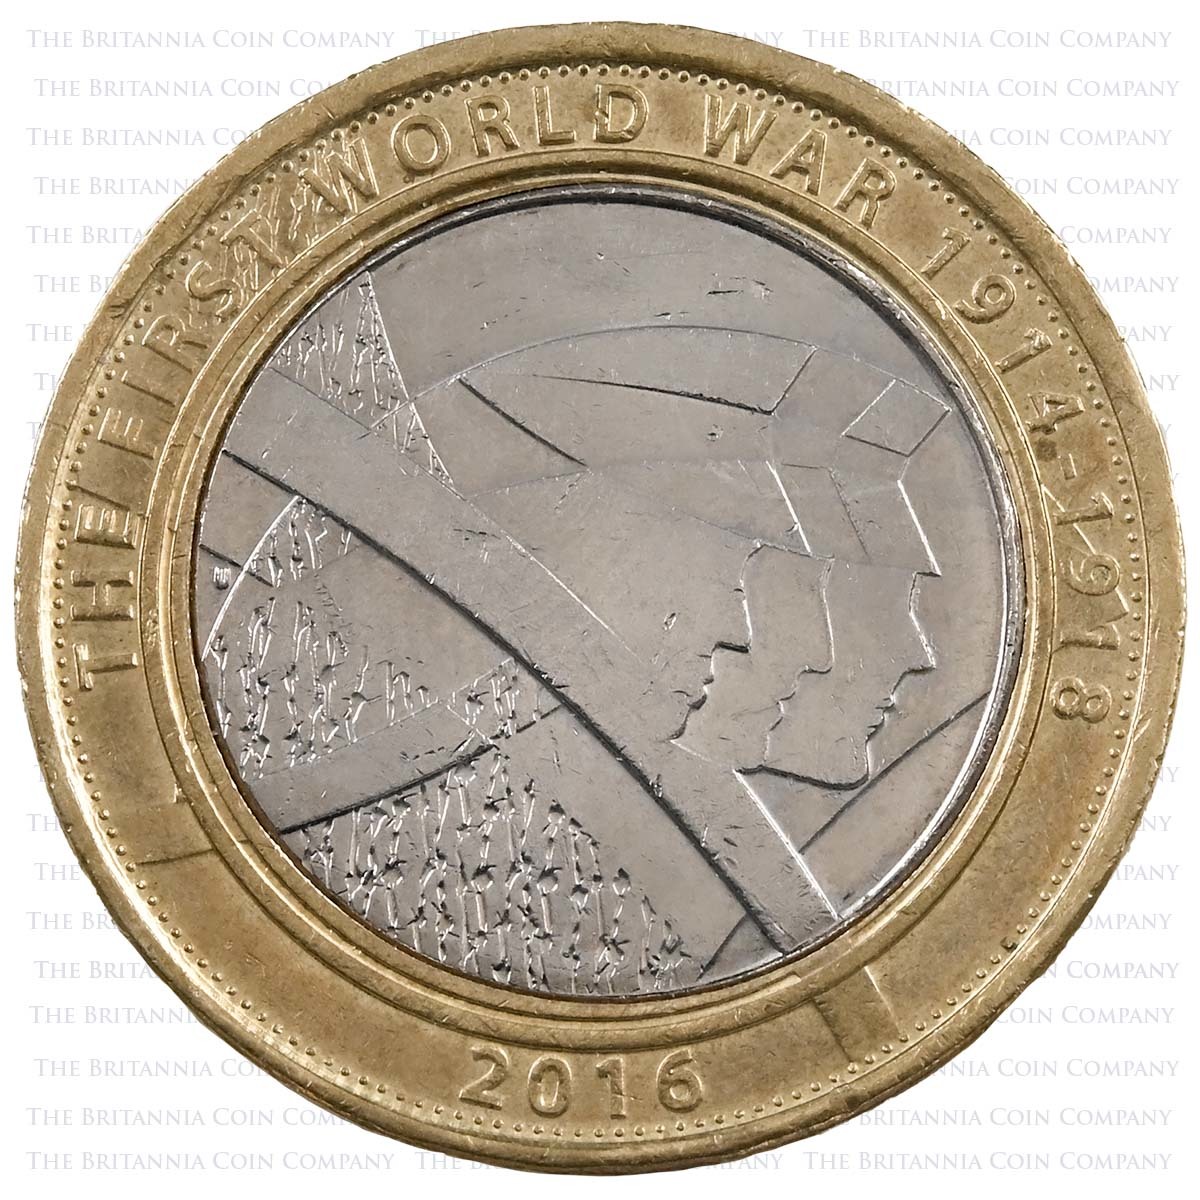 2016 British Army First World War Circulated Two Pound Coin Reverse